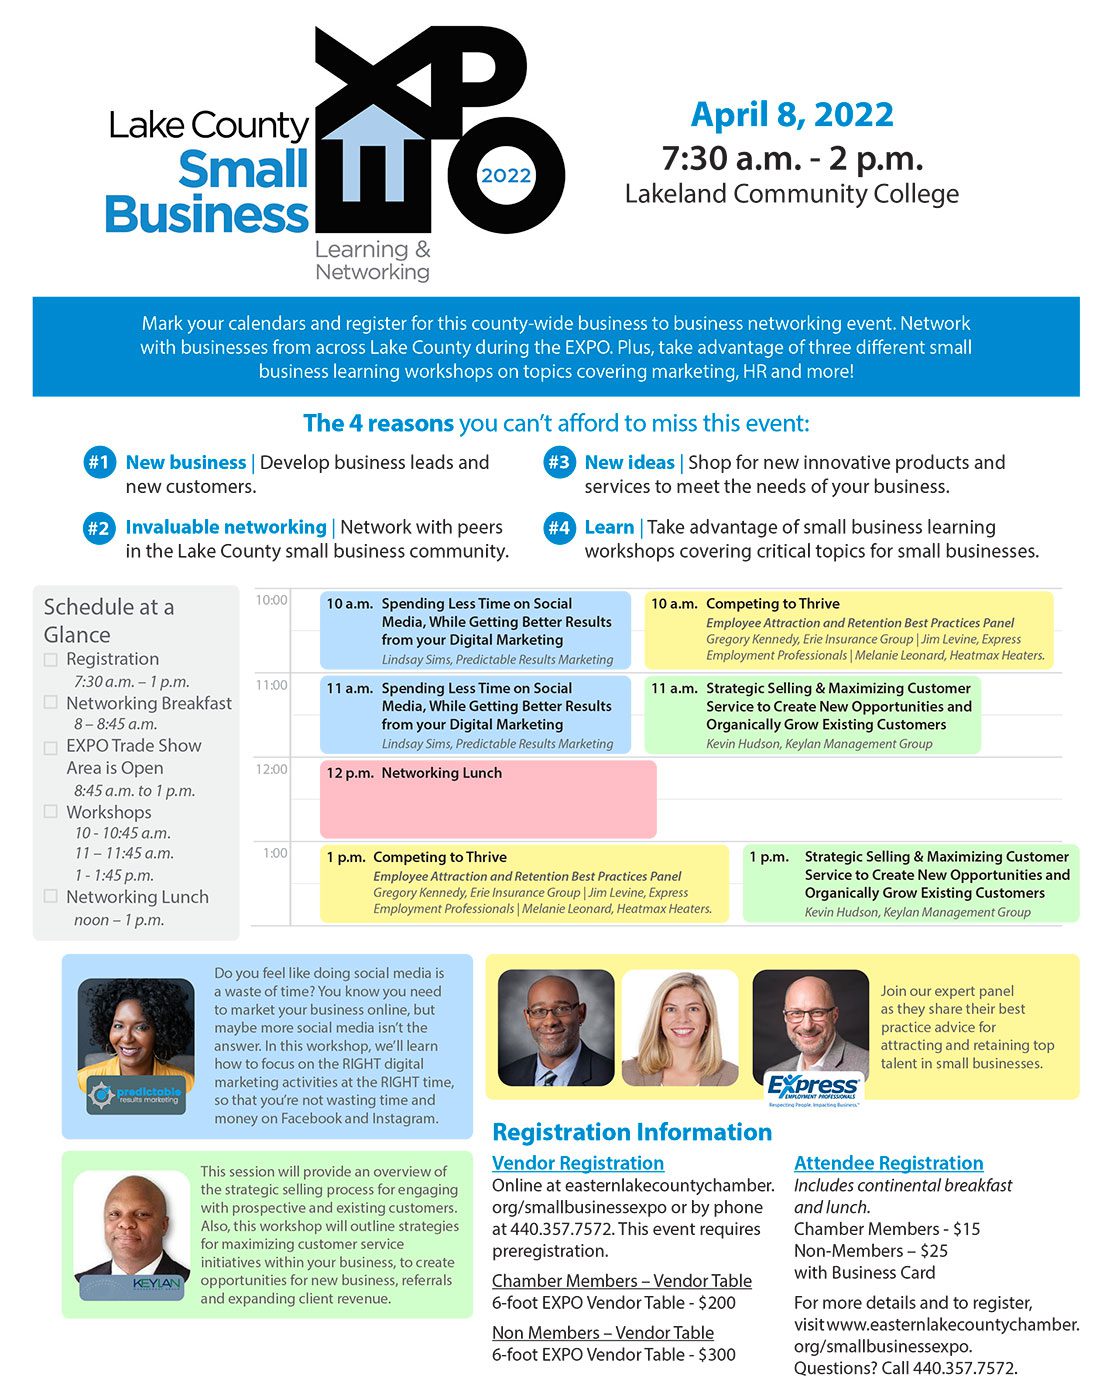 Small Business Expo 2022